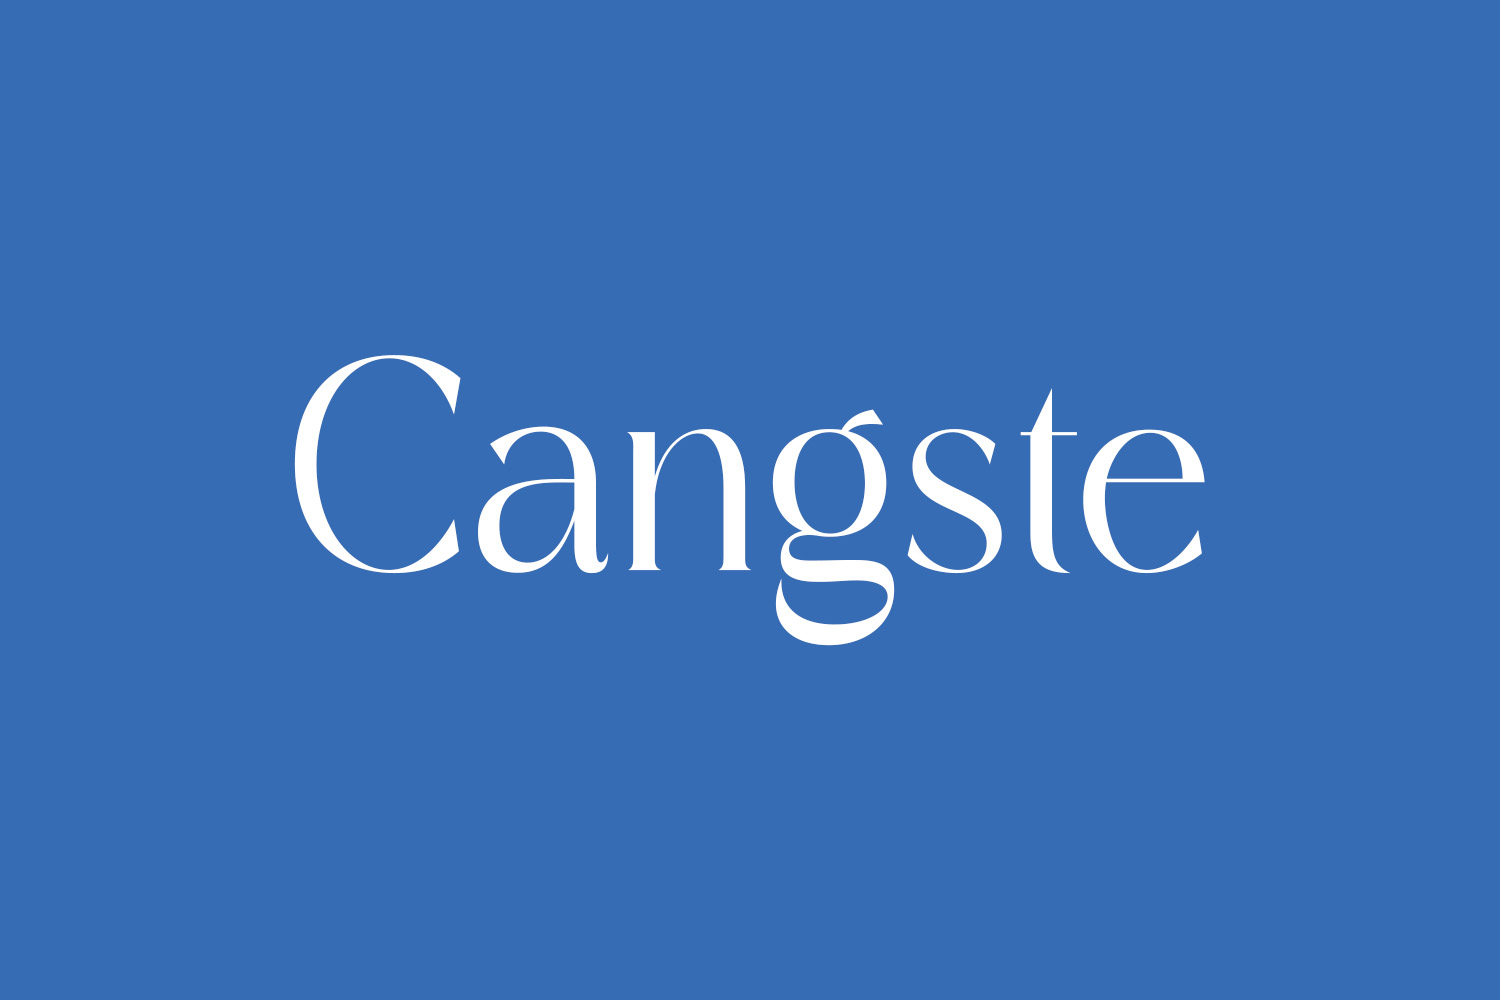 Cangste Free Font